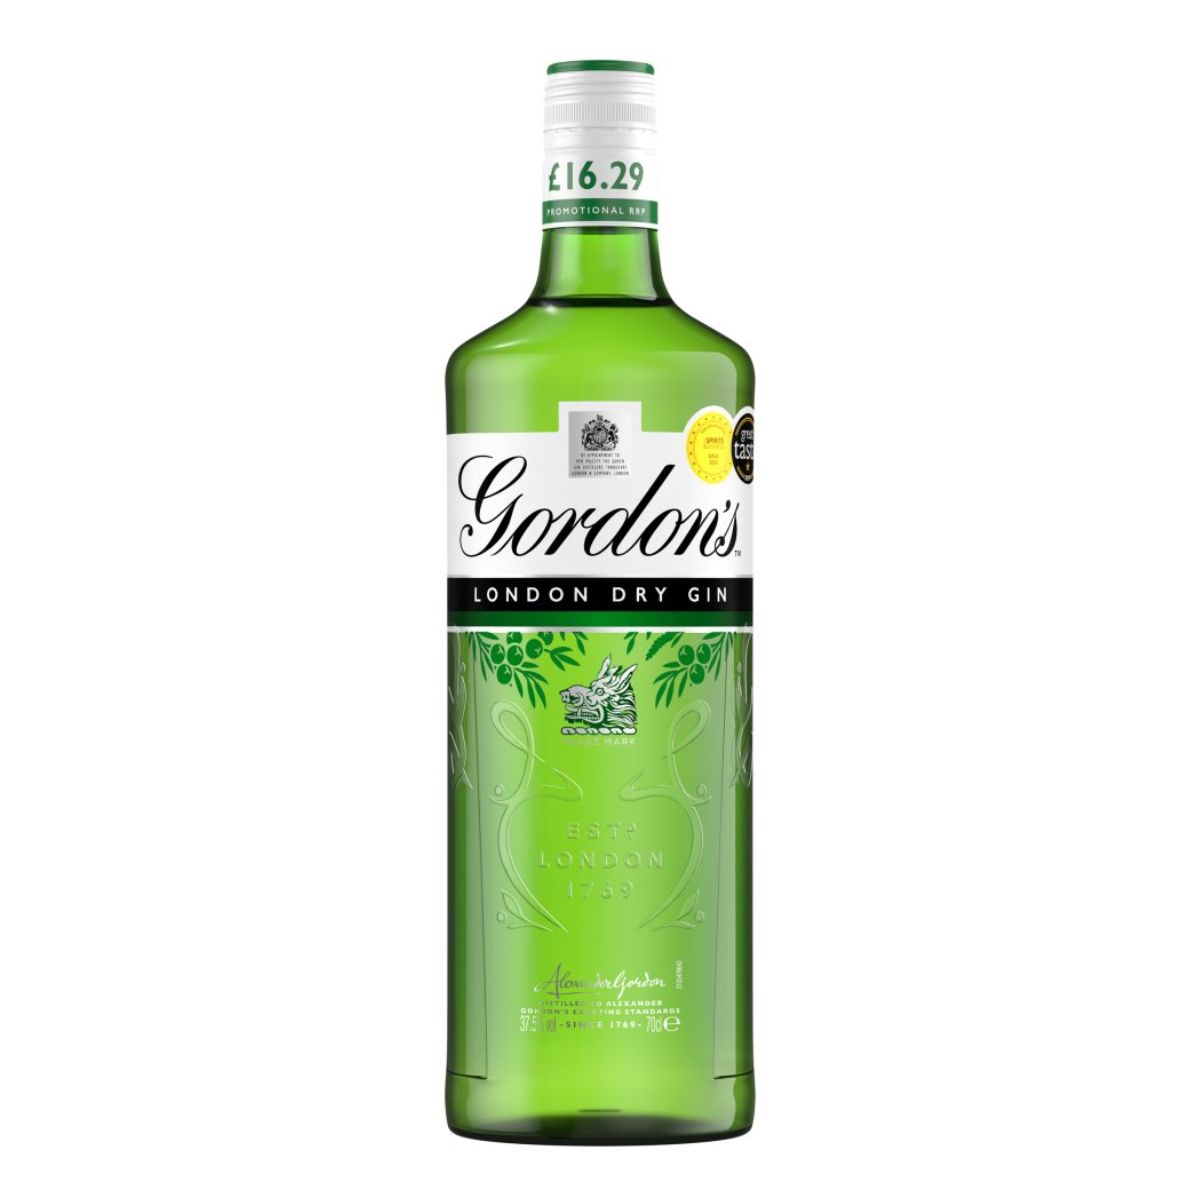 A bottle of Gordons - London Dry Gin (37.5% ABV) - 70cl on a white background.